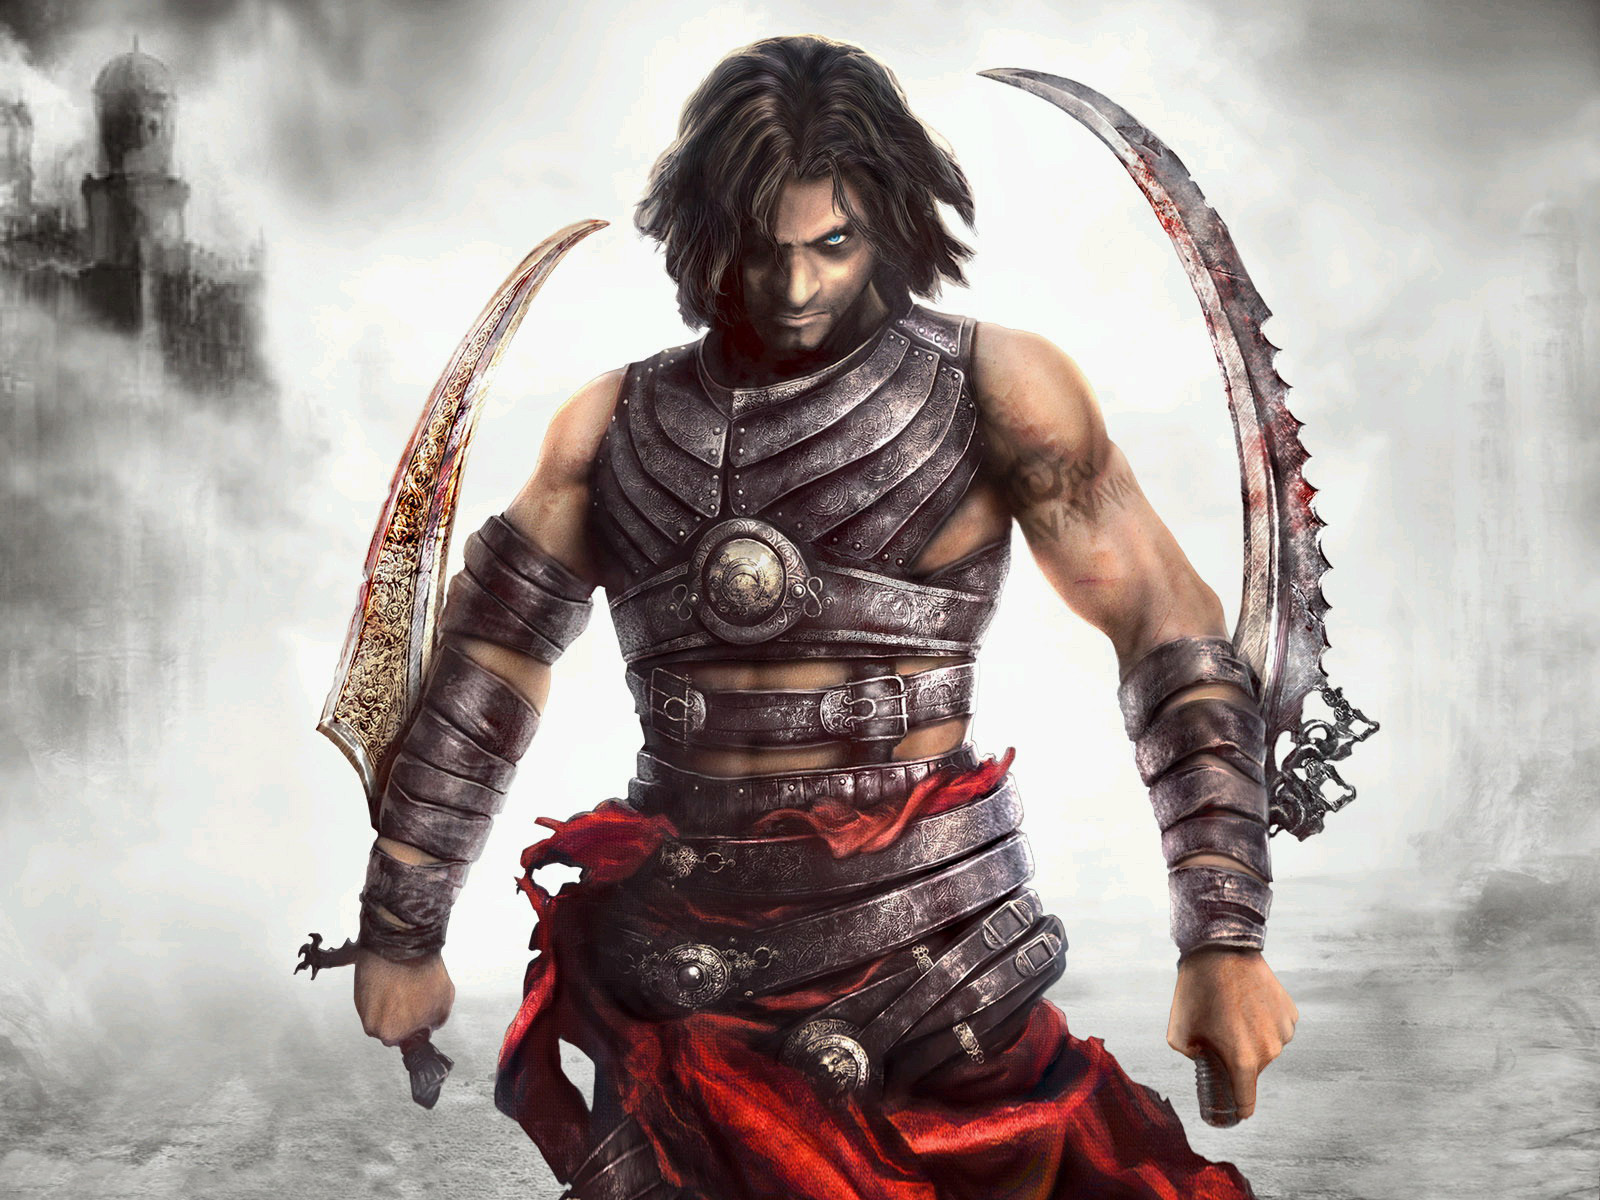 Image Prince of Persia Prince of Persia: Warrior Within Sabre Men warrior Games Man Warriors vdeo game